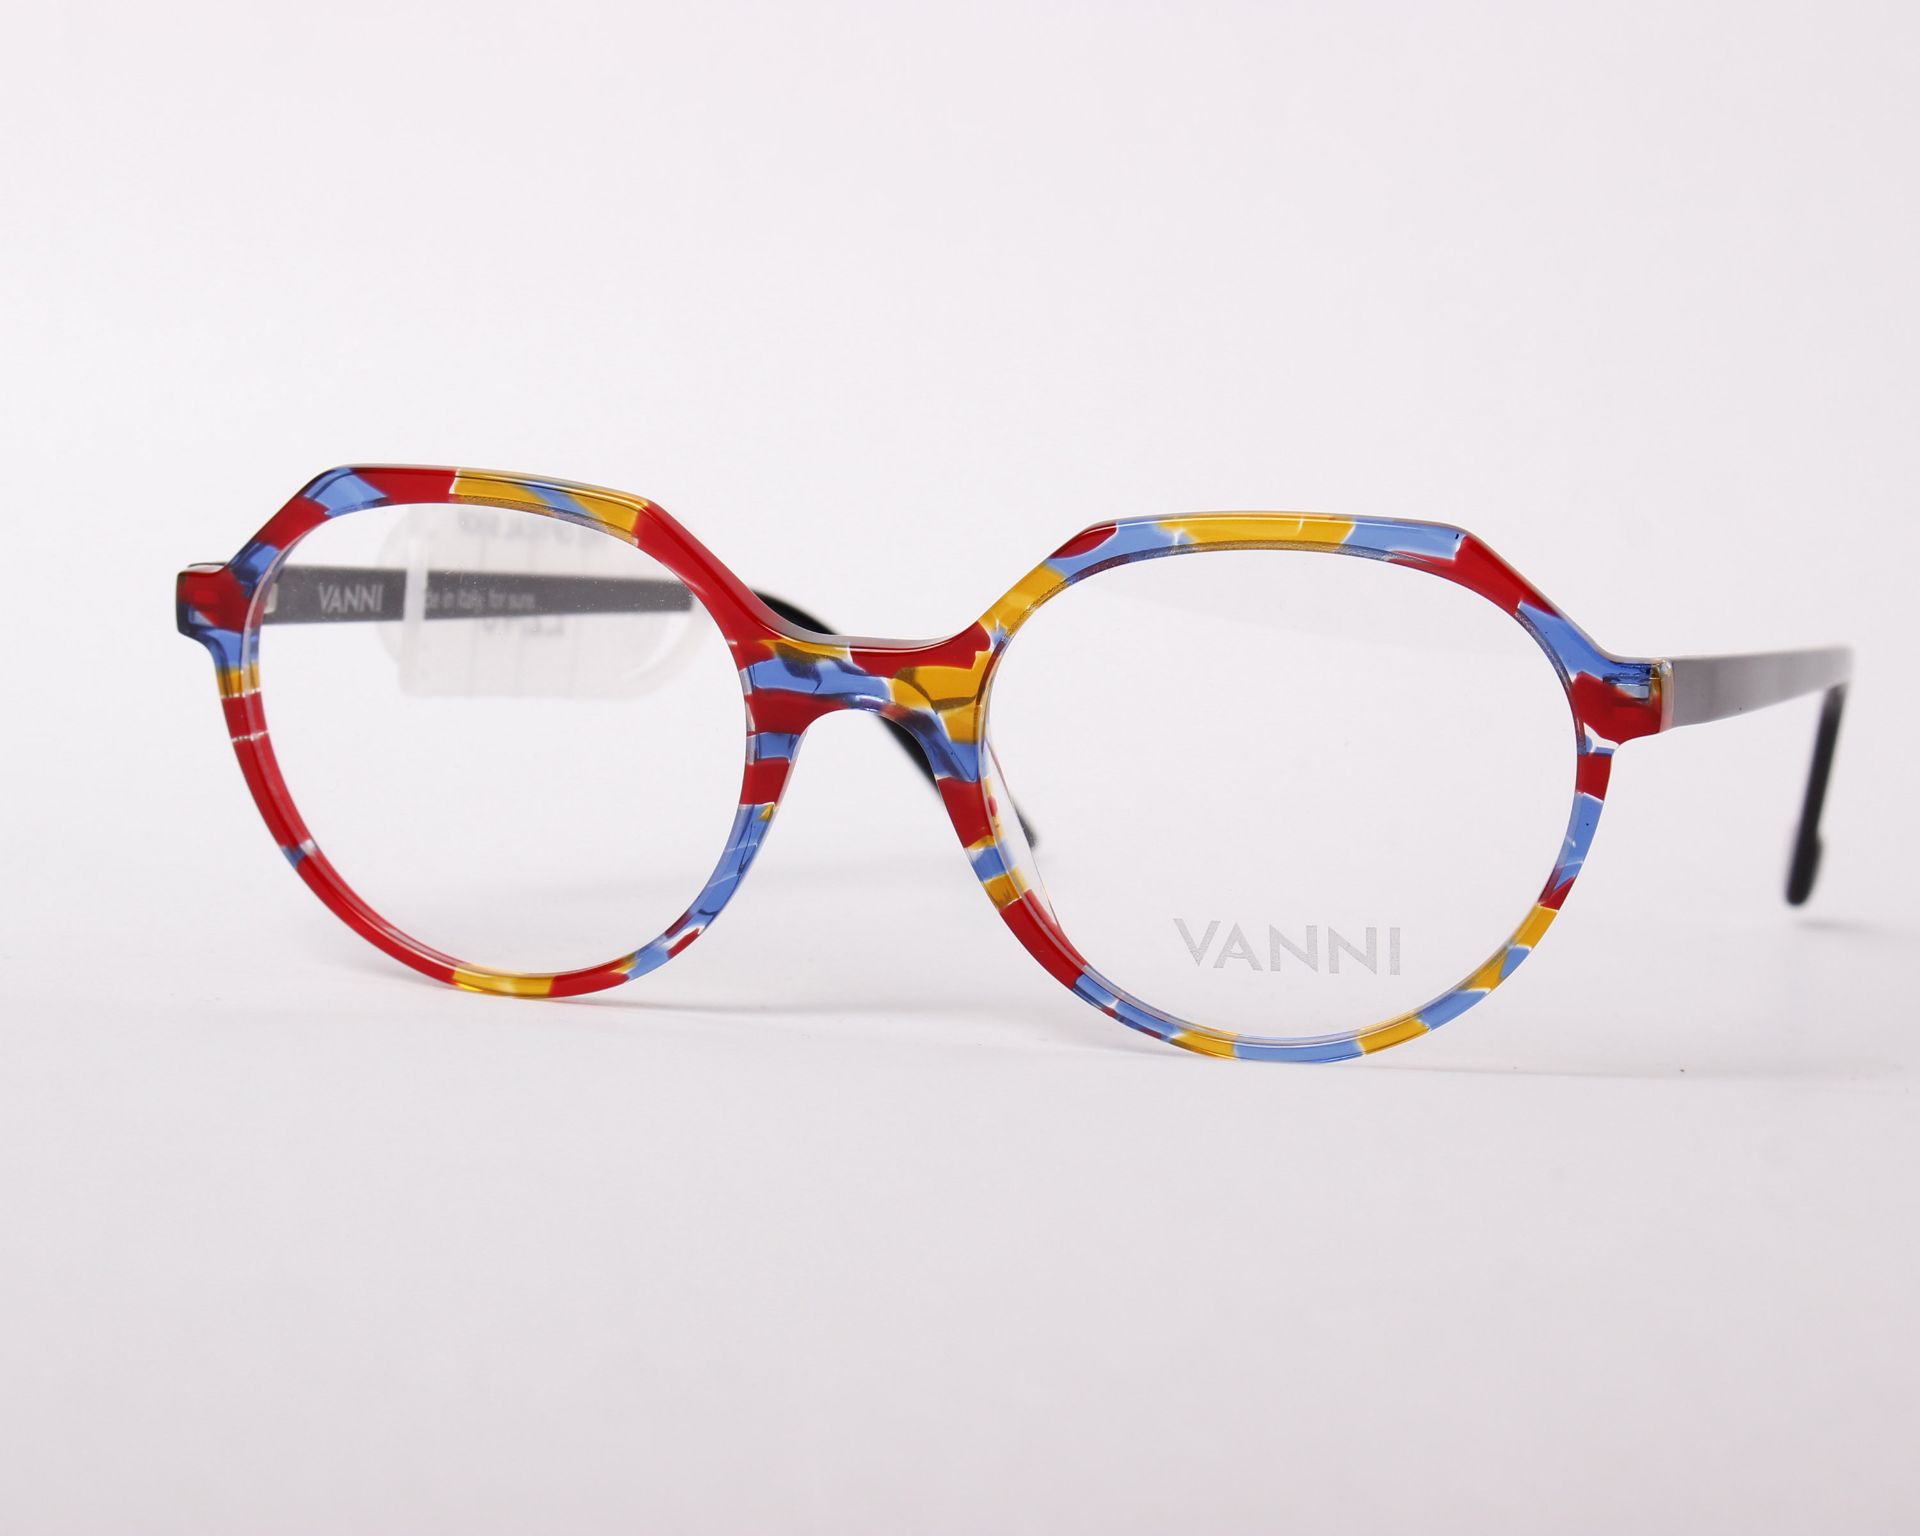 A pair of as new Vanni glasses frames with clear glass (RRP £240). - Image 2 of 3